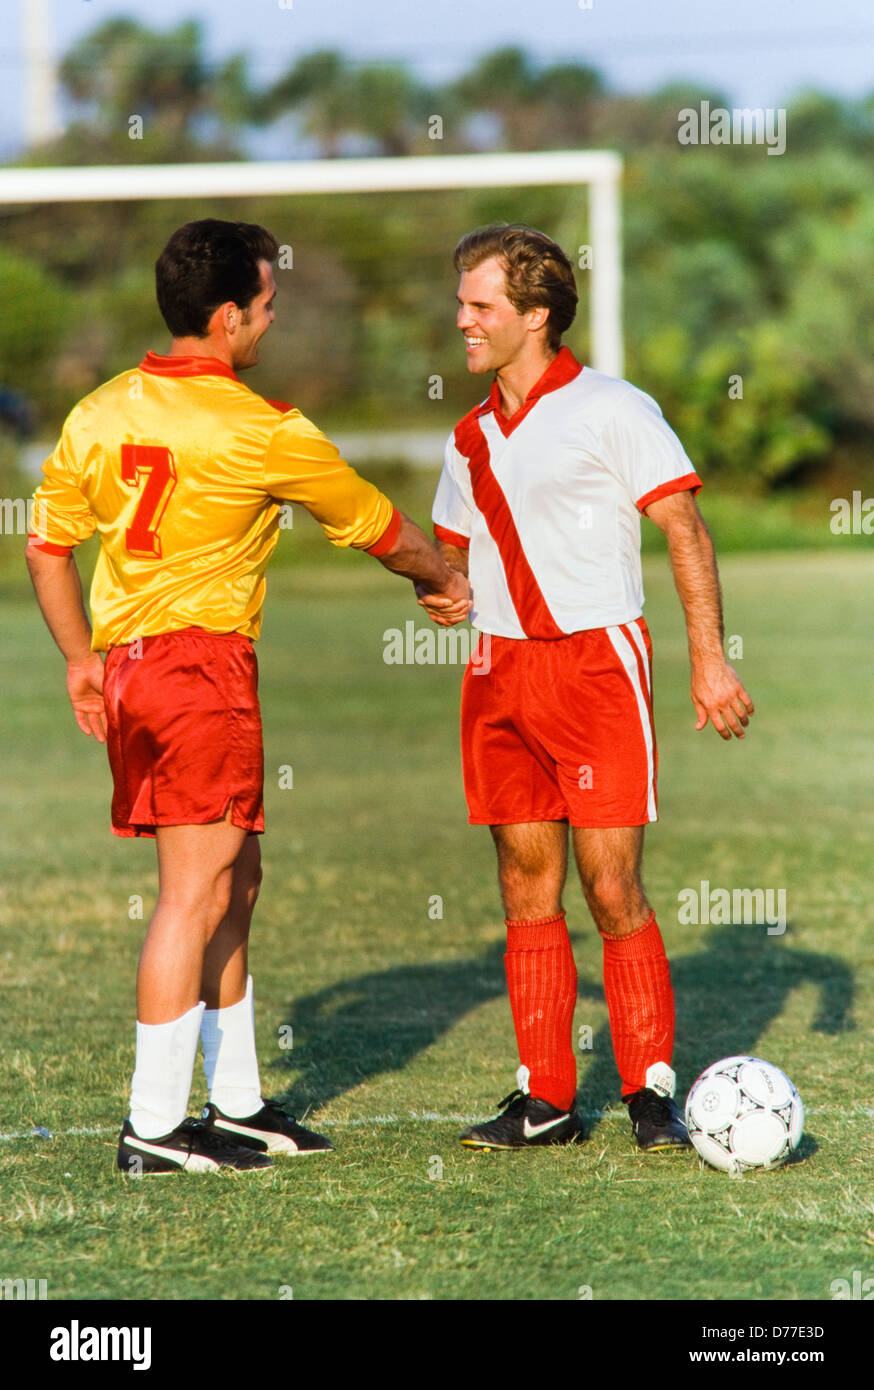 Soccer players shake hands after game, good sportsmanship, competition, Miami Stock Photo